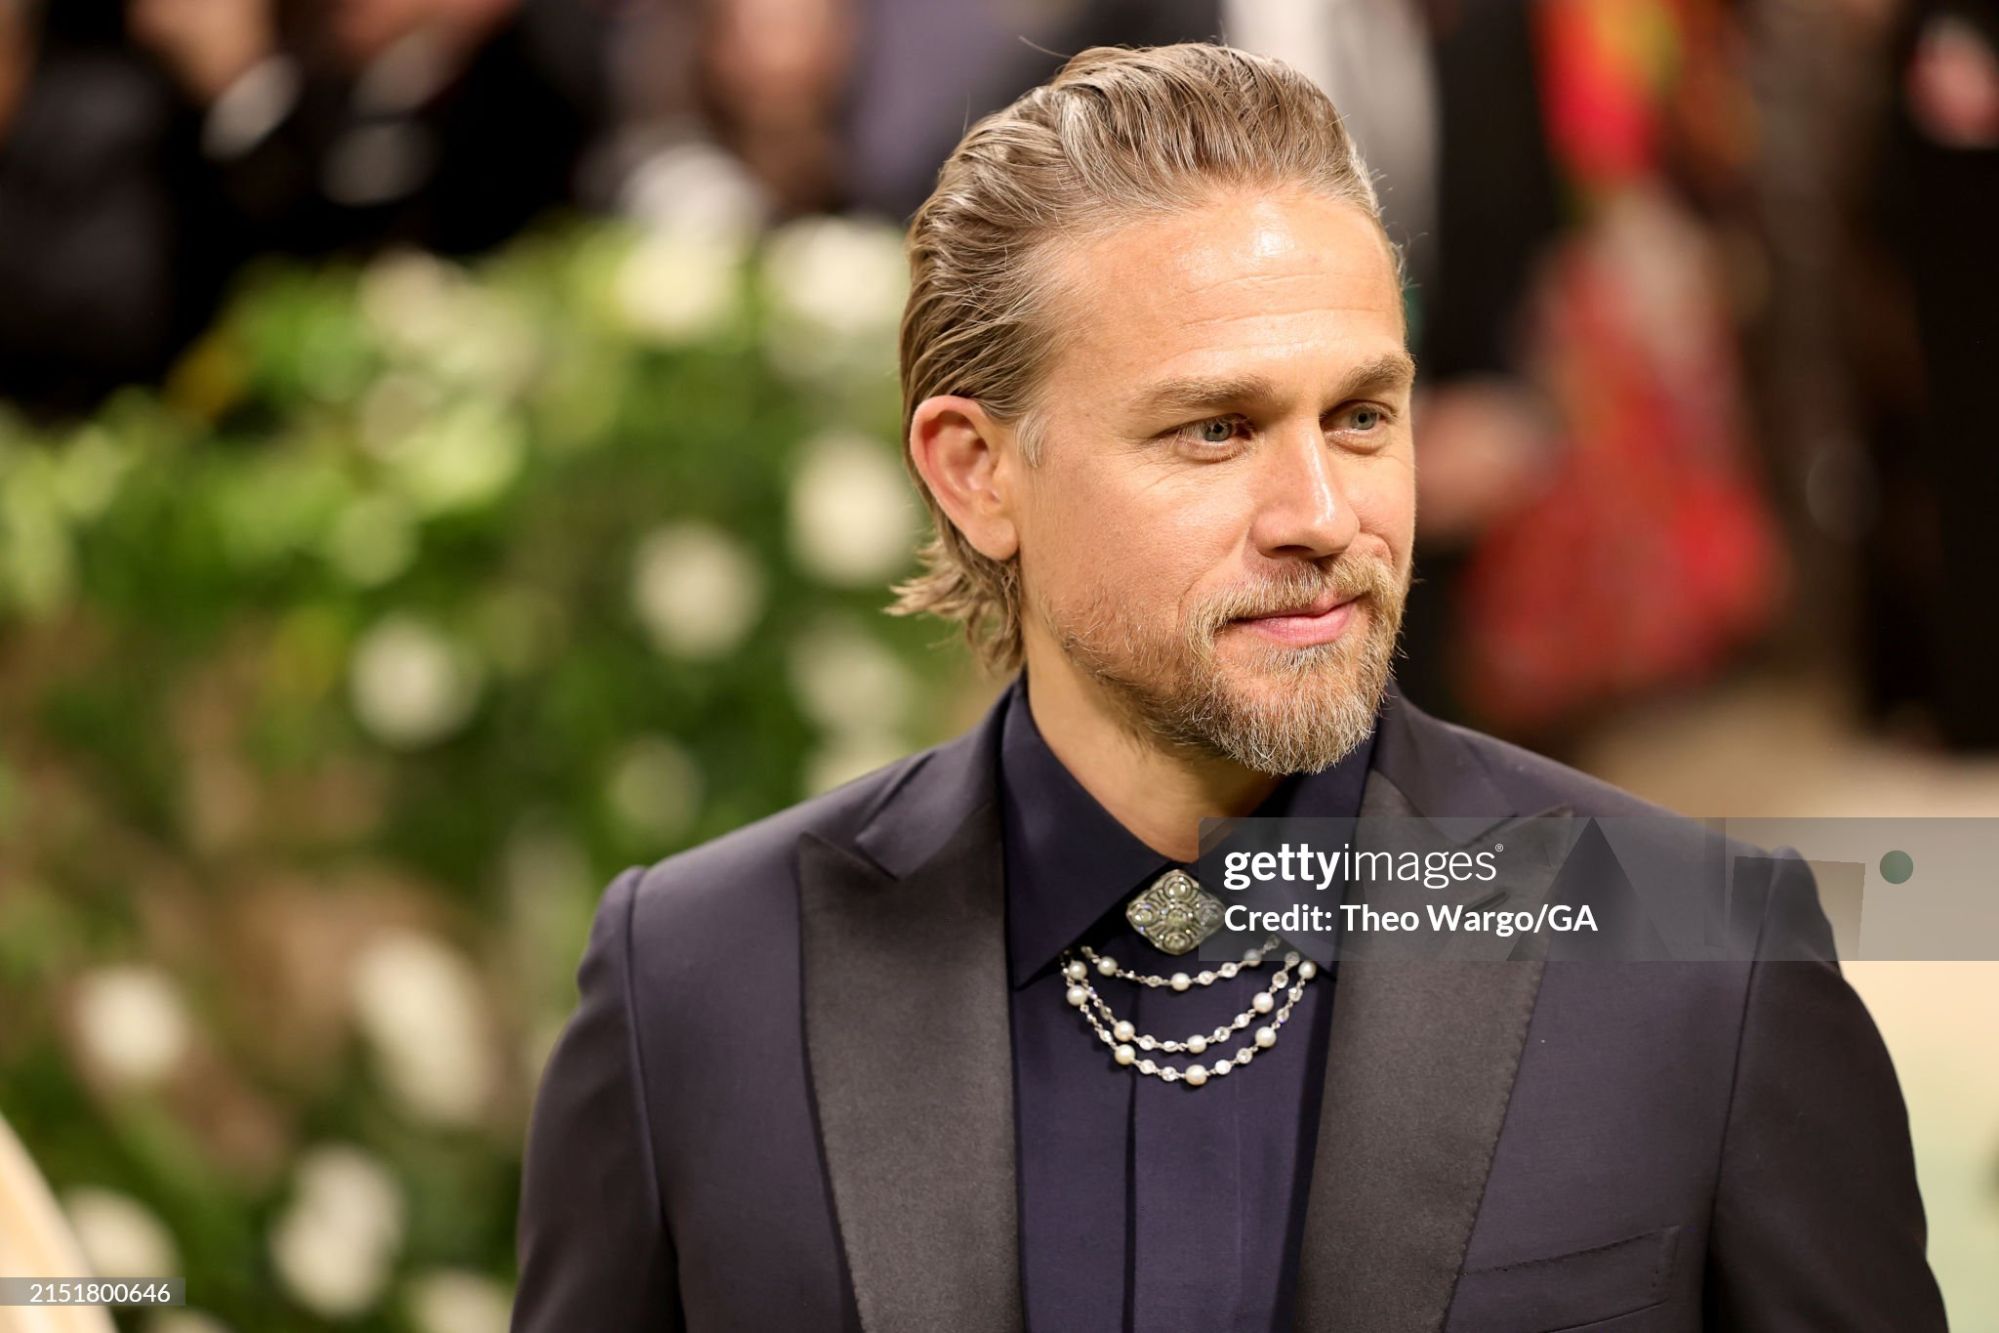 gettyimages-2151800646-2048x2048.jpg